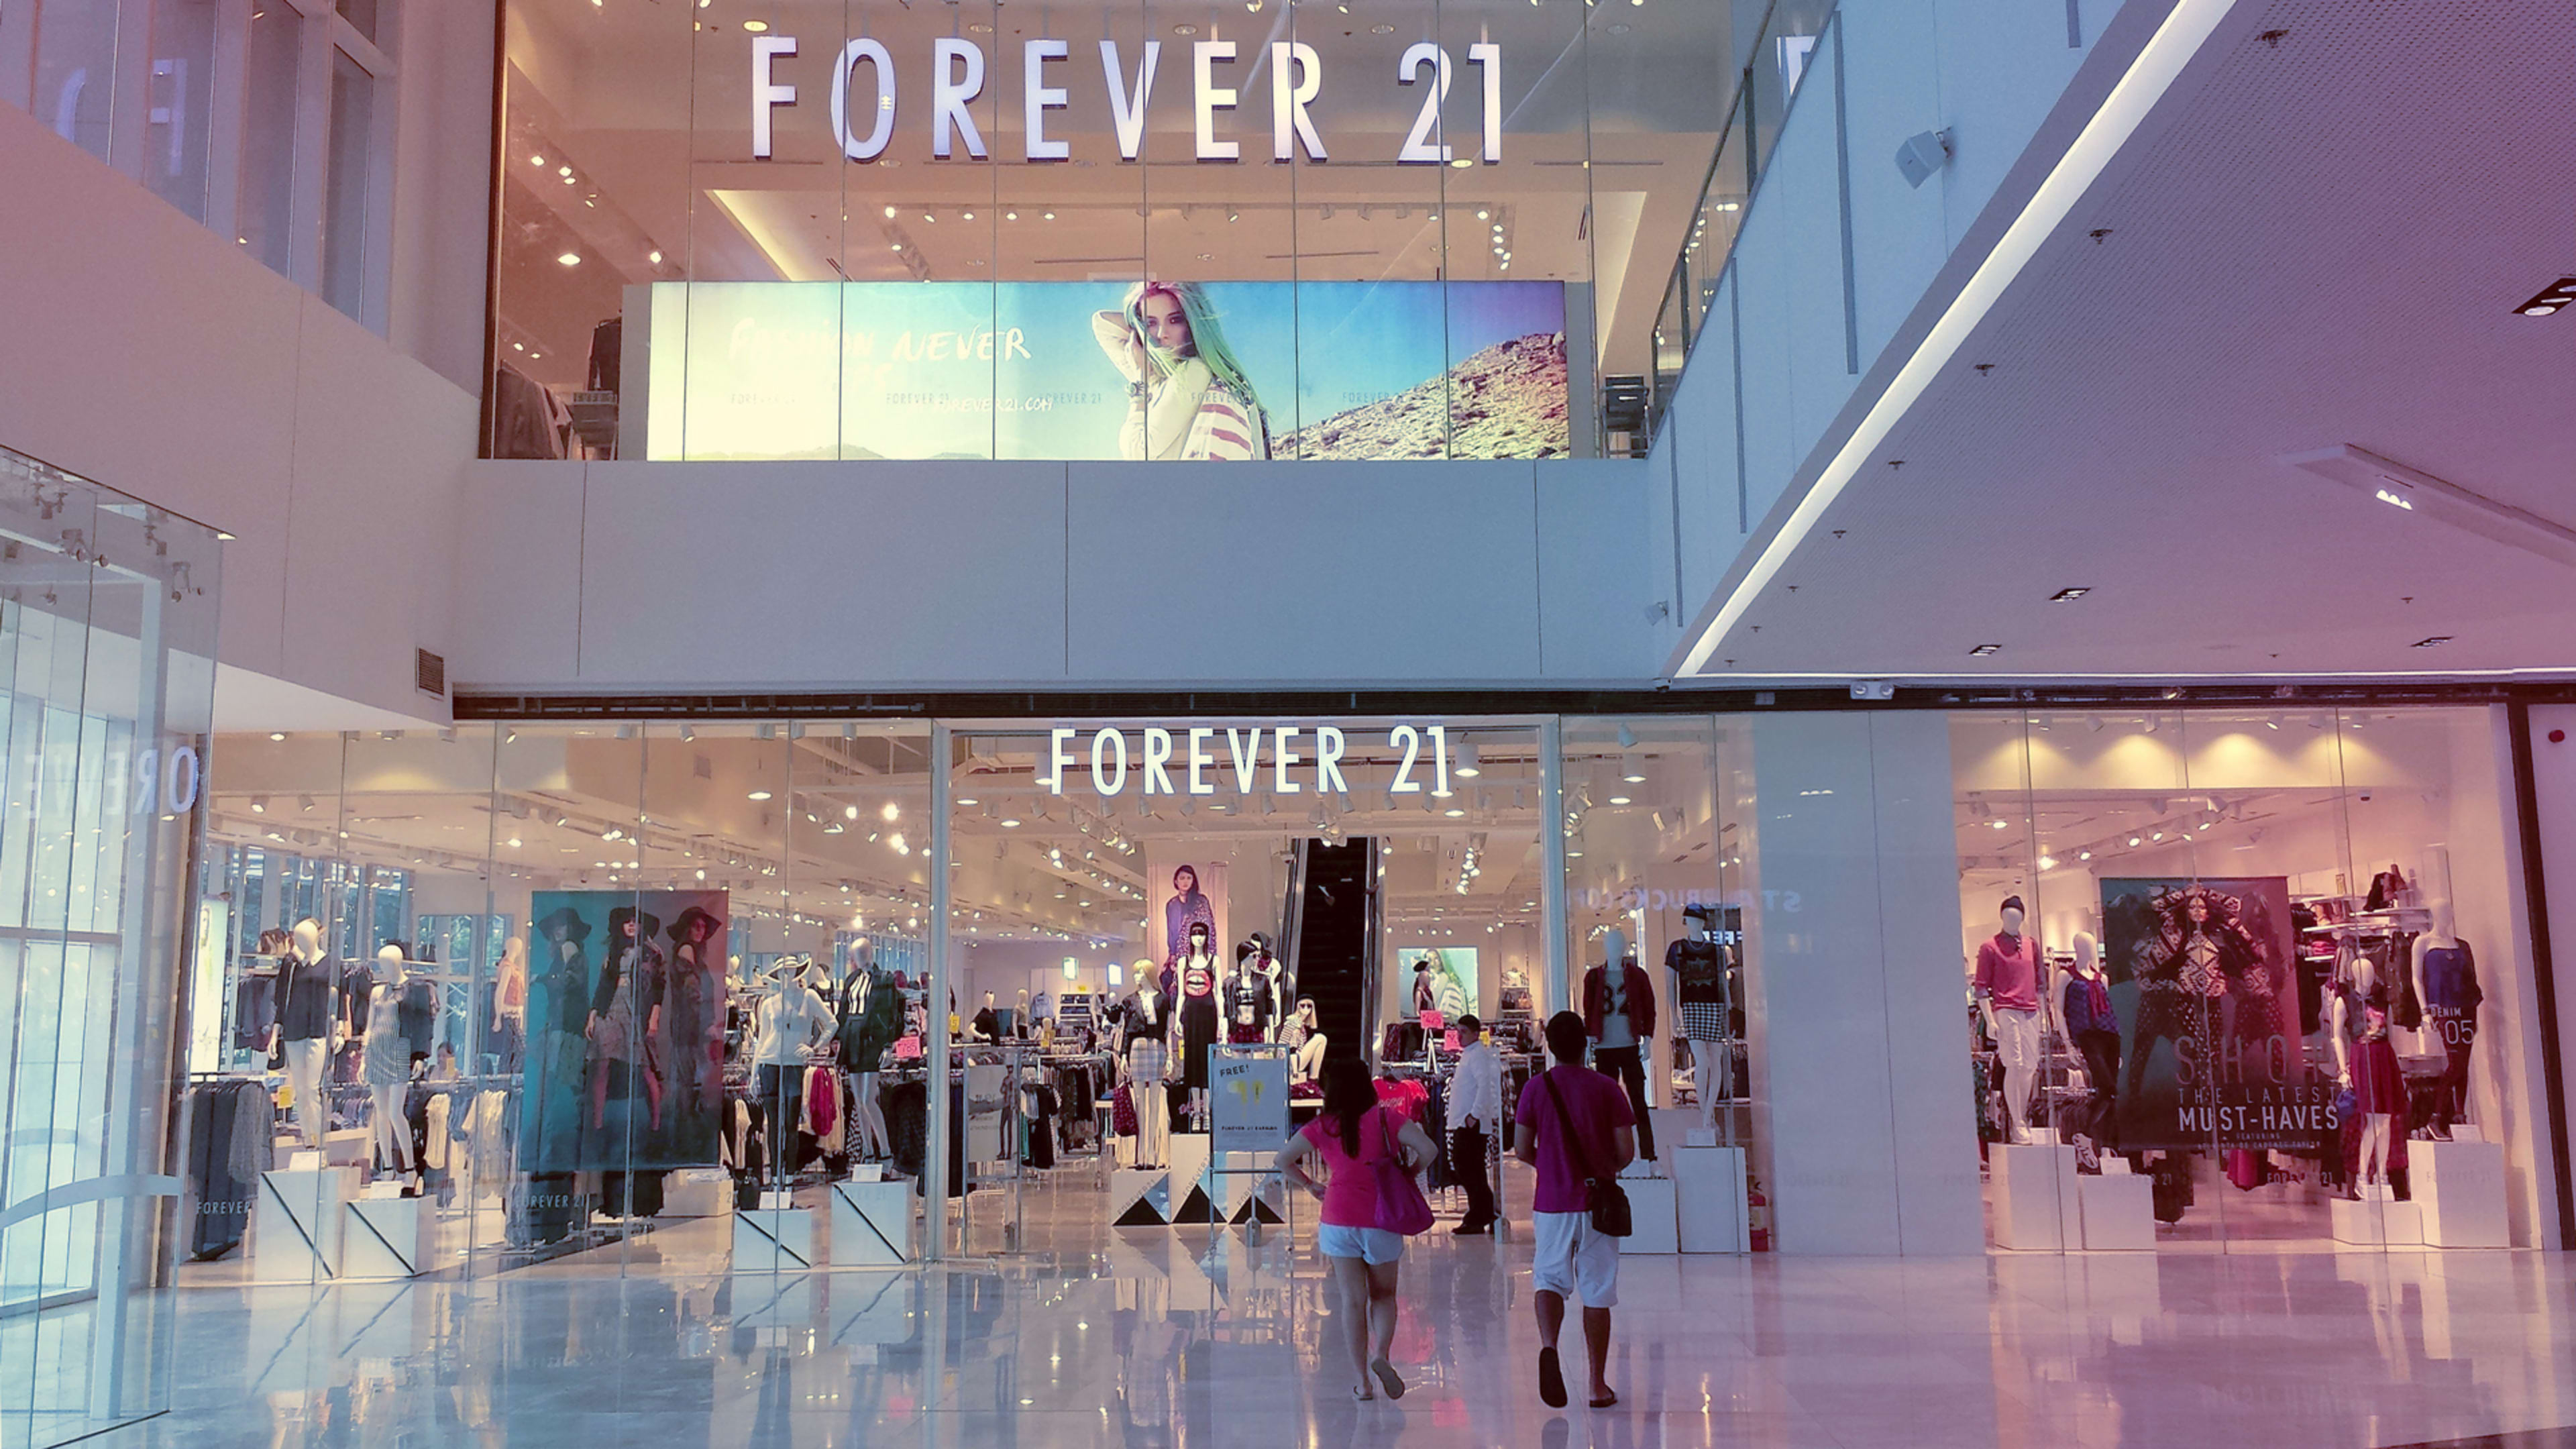 A mall owner is buying Forever 21 because it doesn’t want more vacant storefronts